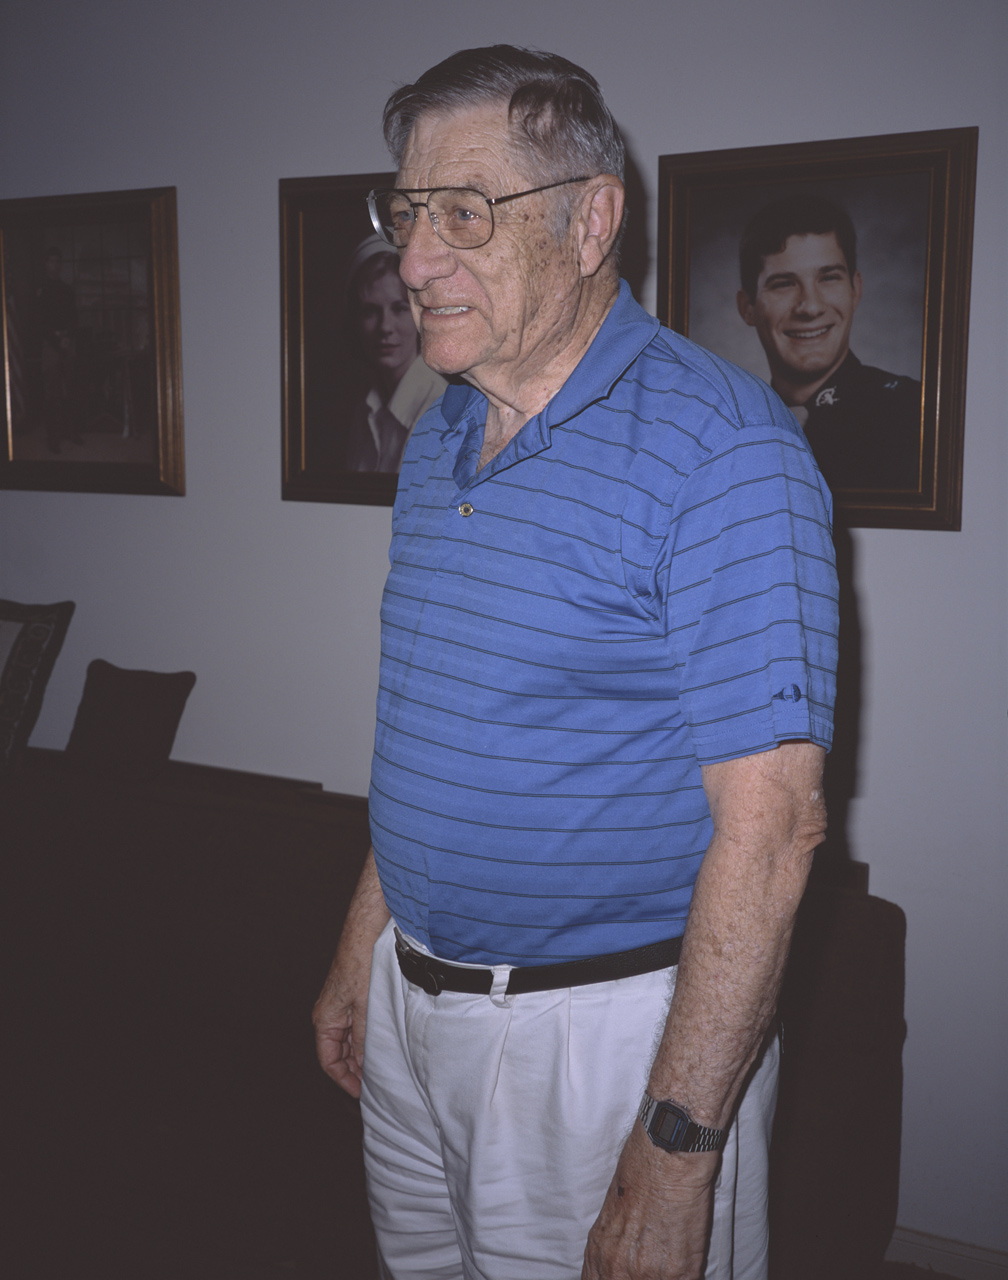 Uncle Jimmy standing in front of portraits of Jimbo, Susie, and Bill